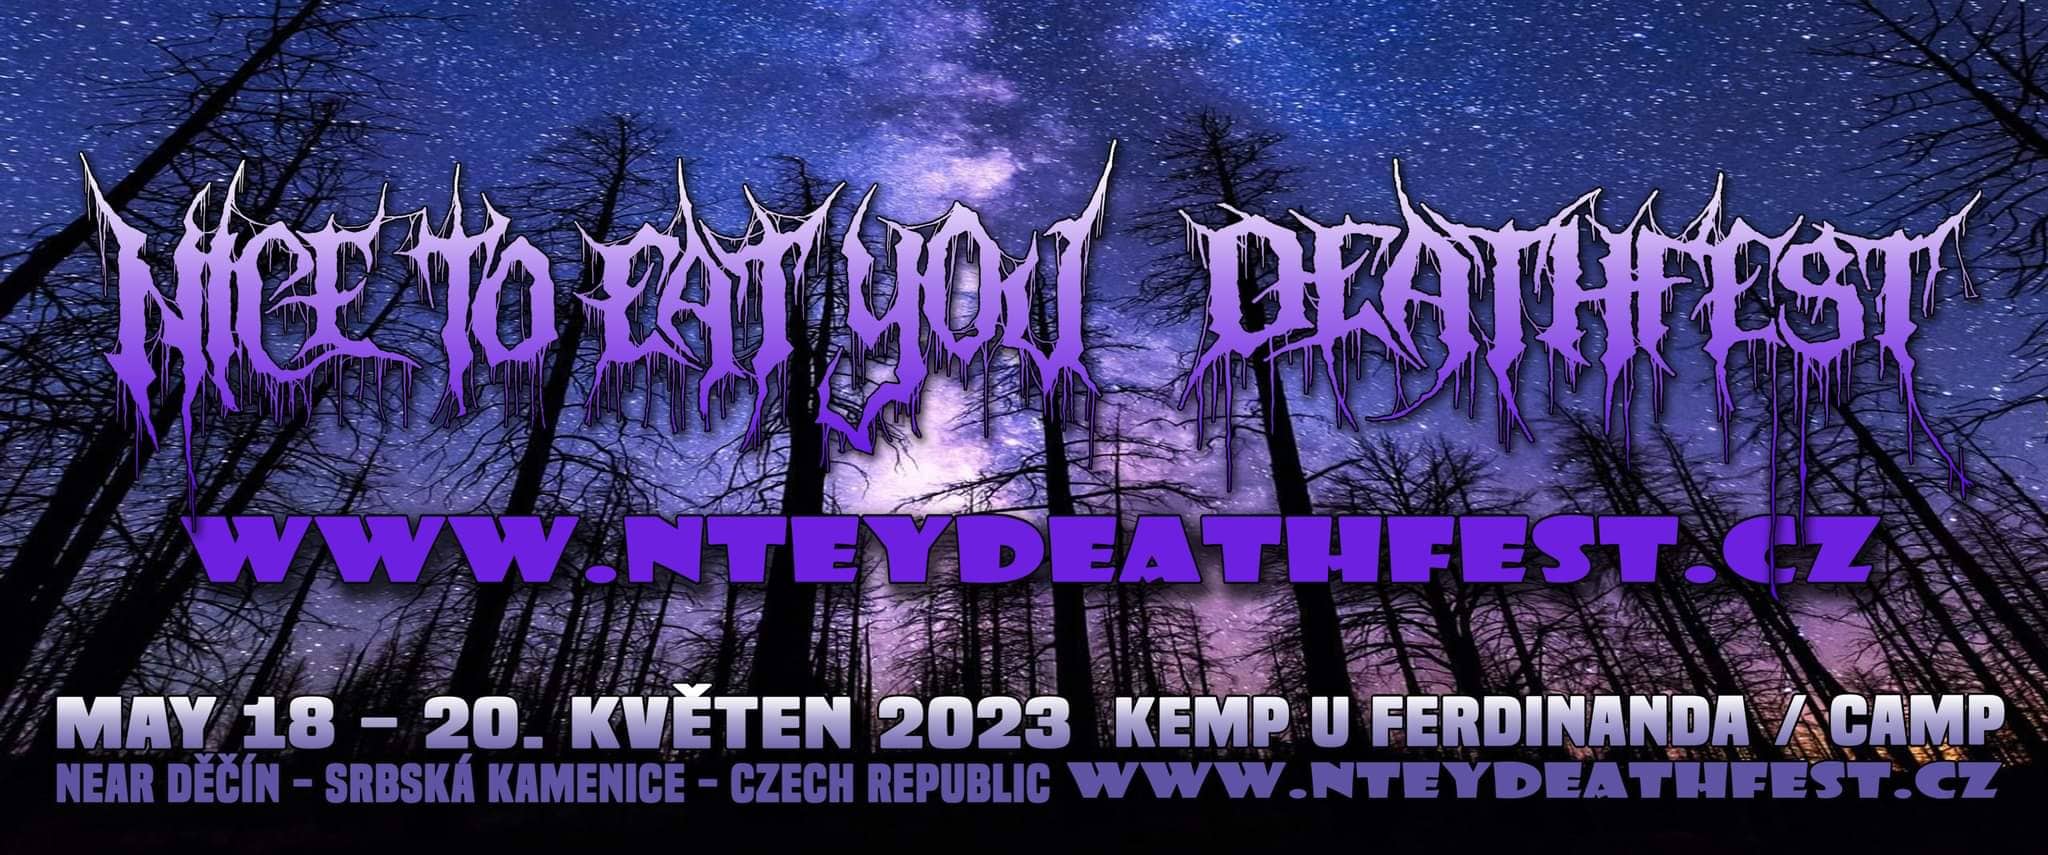 NICE TO EAT YOU DEATHFEST